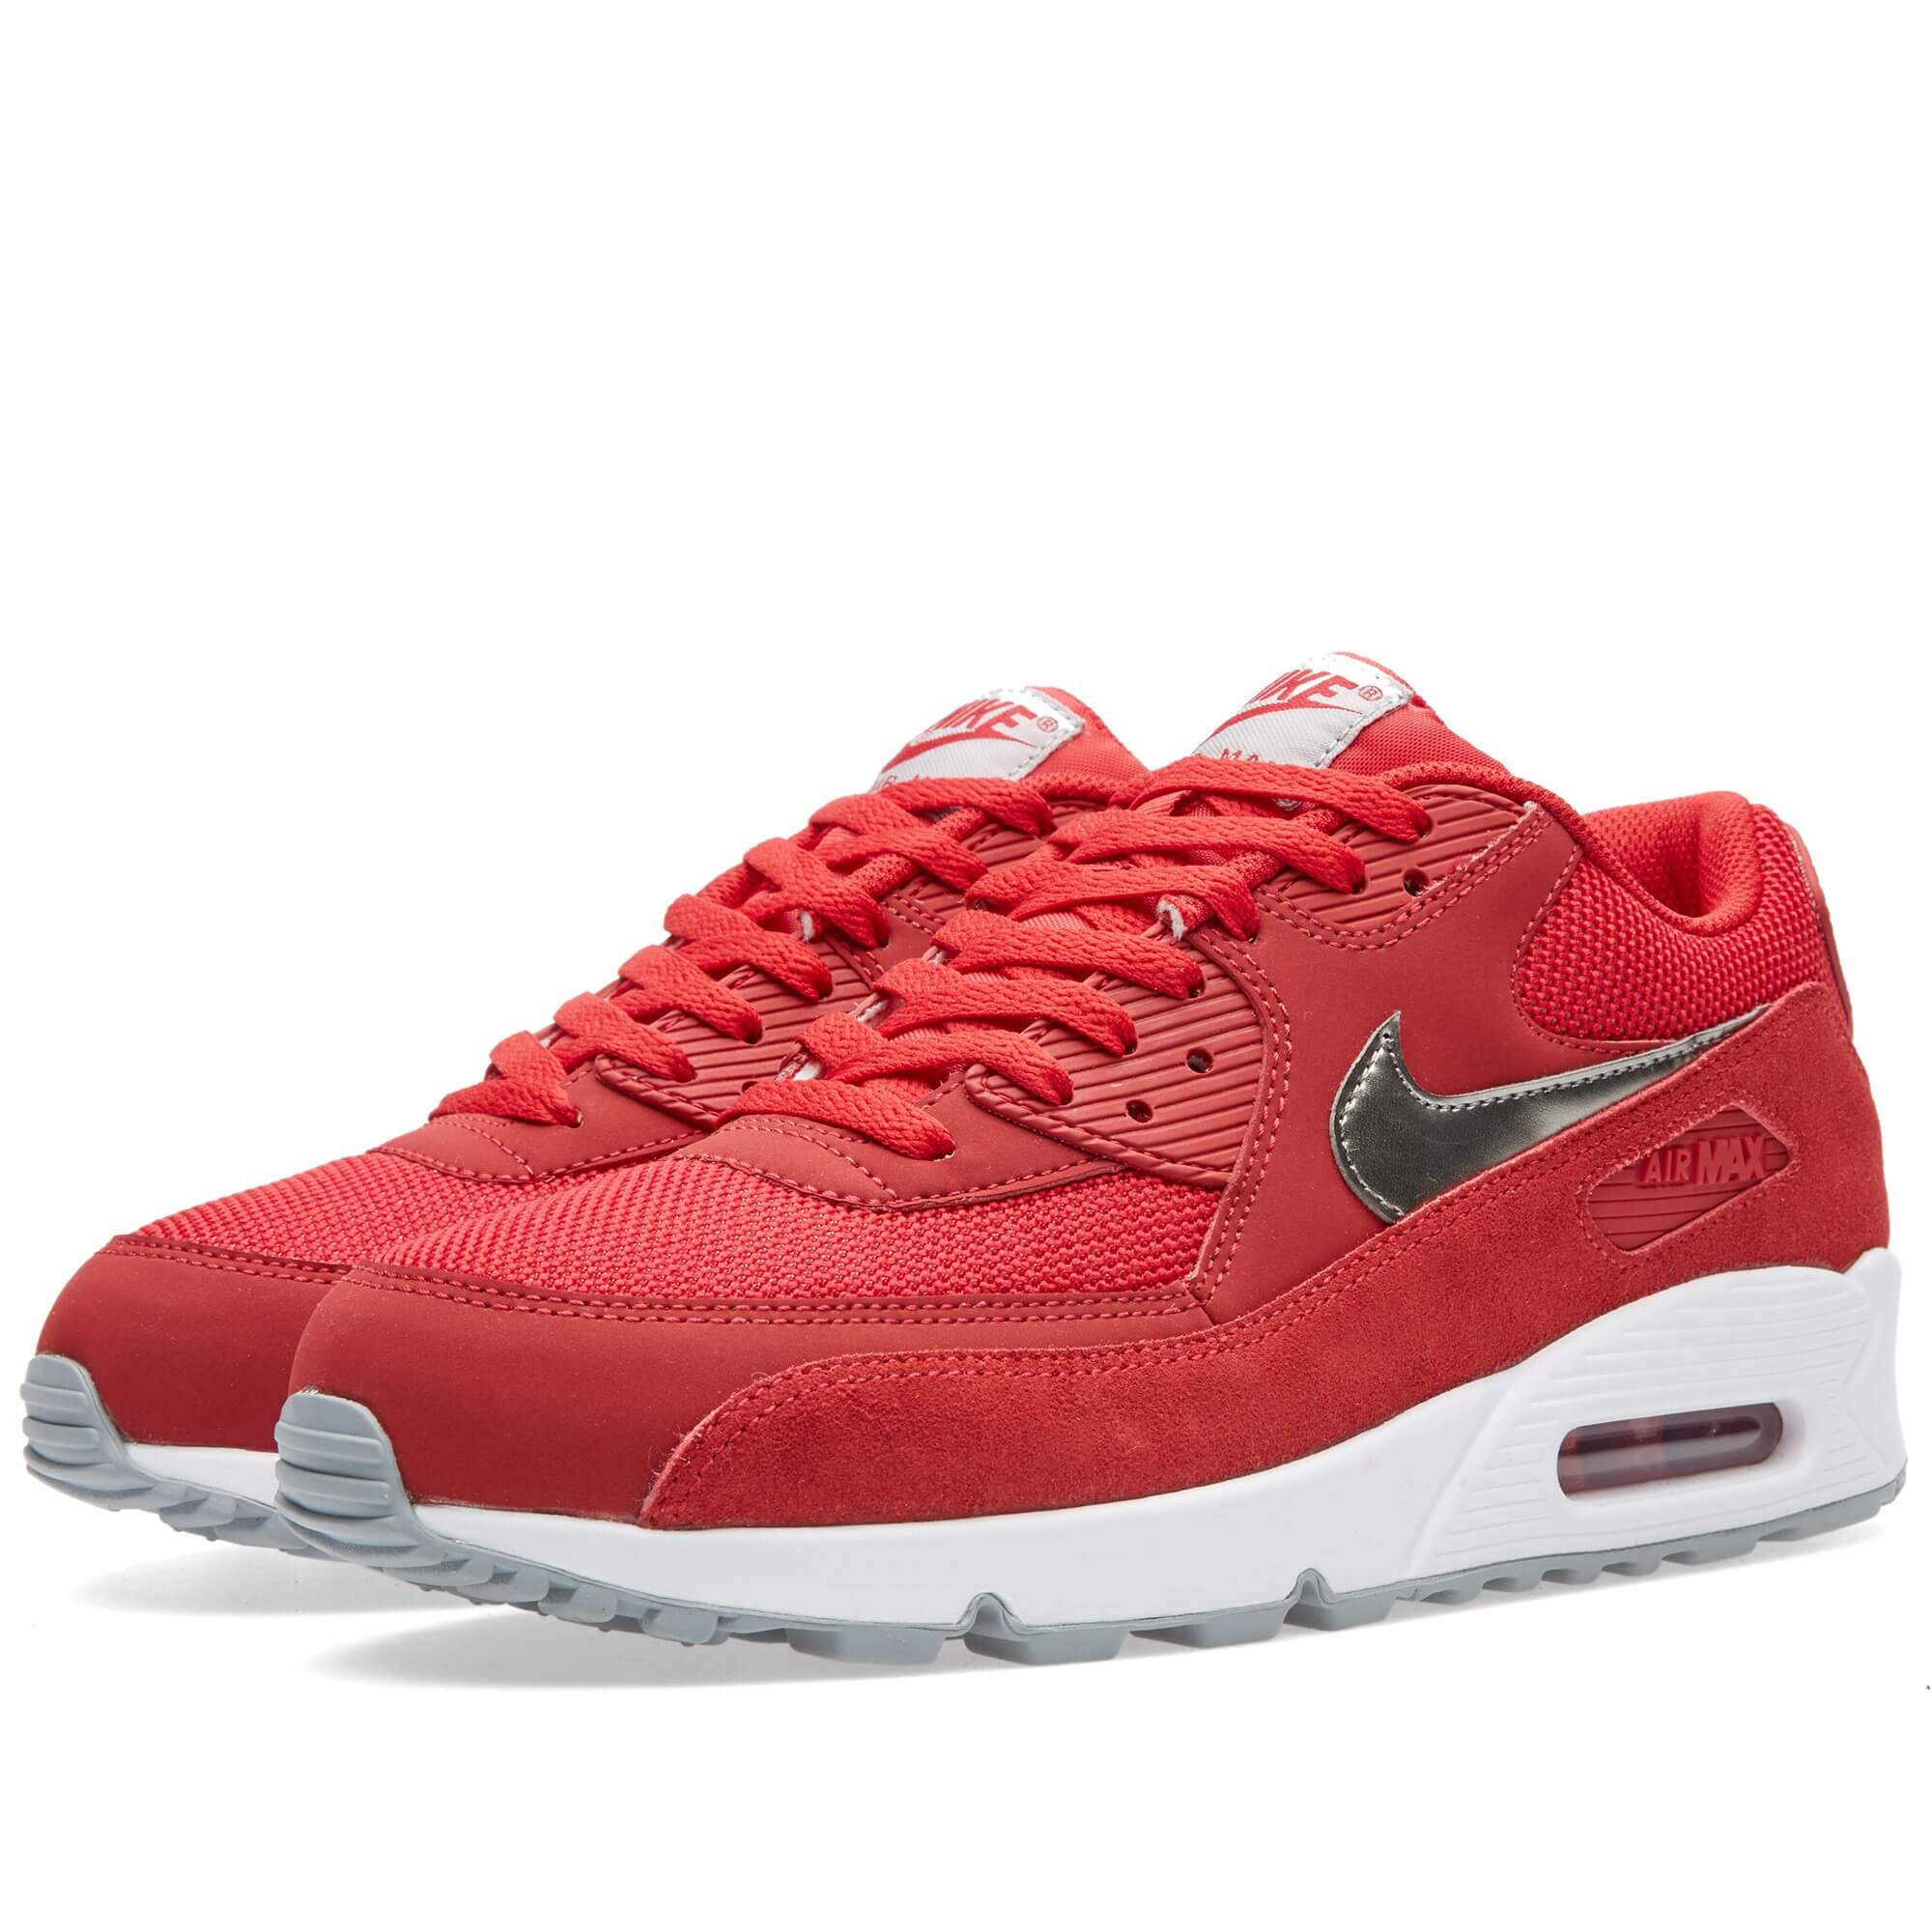 red and white nike air max 90